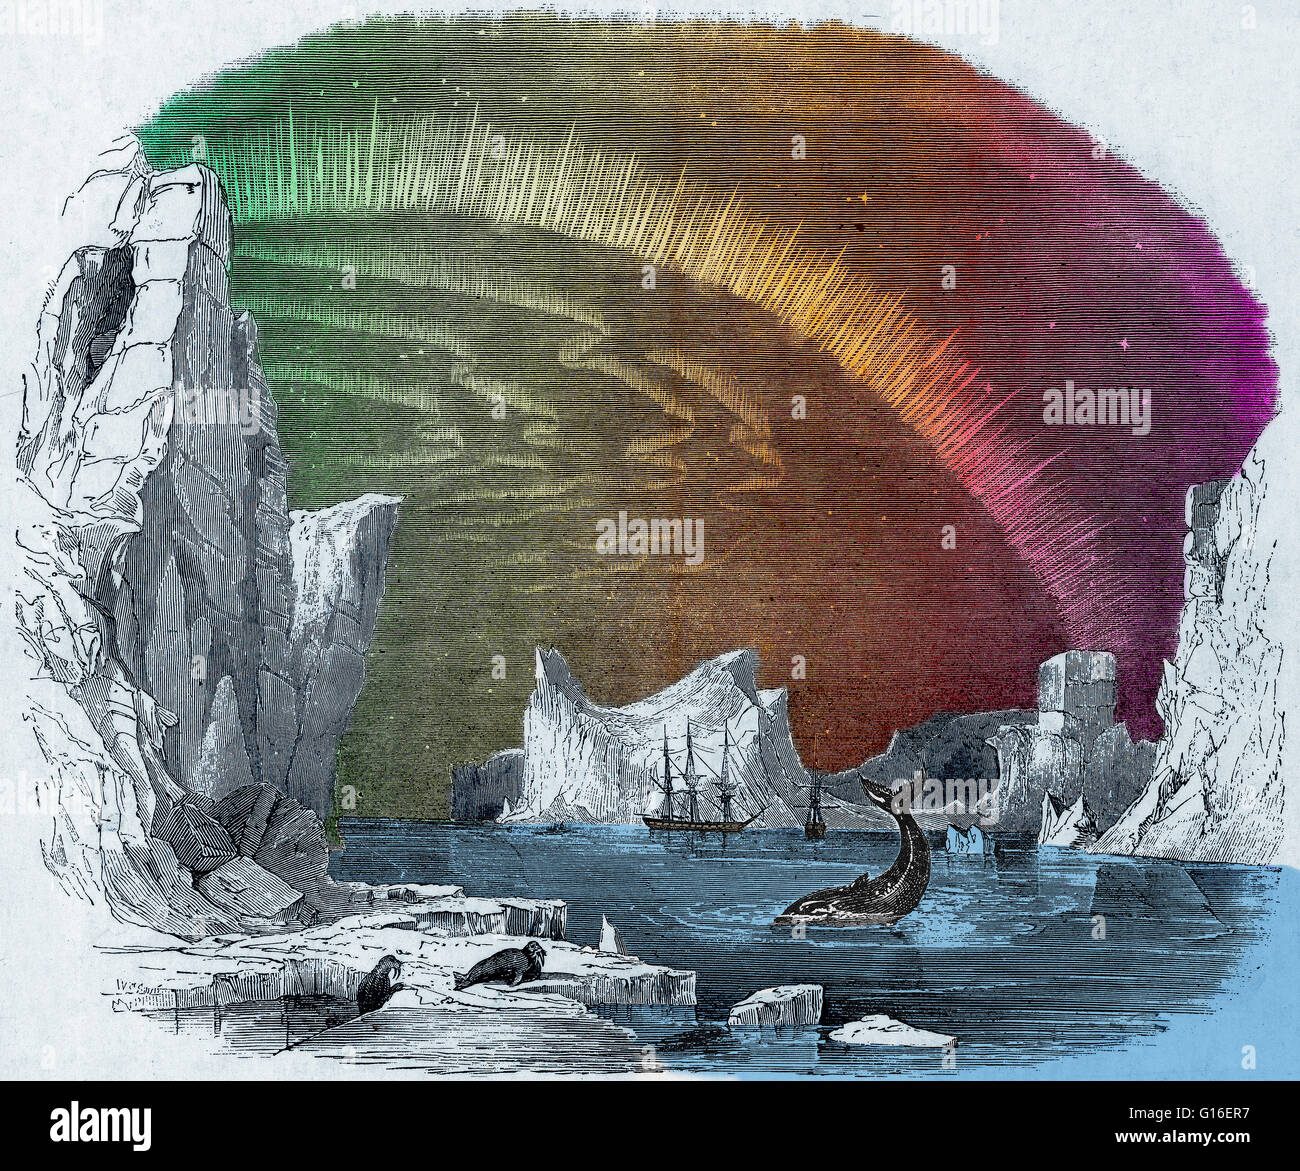 Colorized image of Icebergs and the Aurora Borealis, from October 1849. This image was published in the Illustrated London News to accompany an article about a search for Sir John Franklin's lost Arctic expedition. John Franklin (1786-1847) was a British Stock Photo